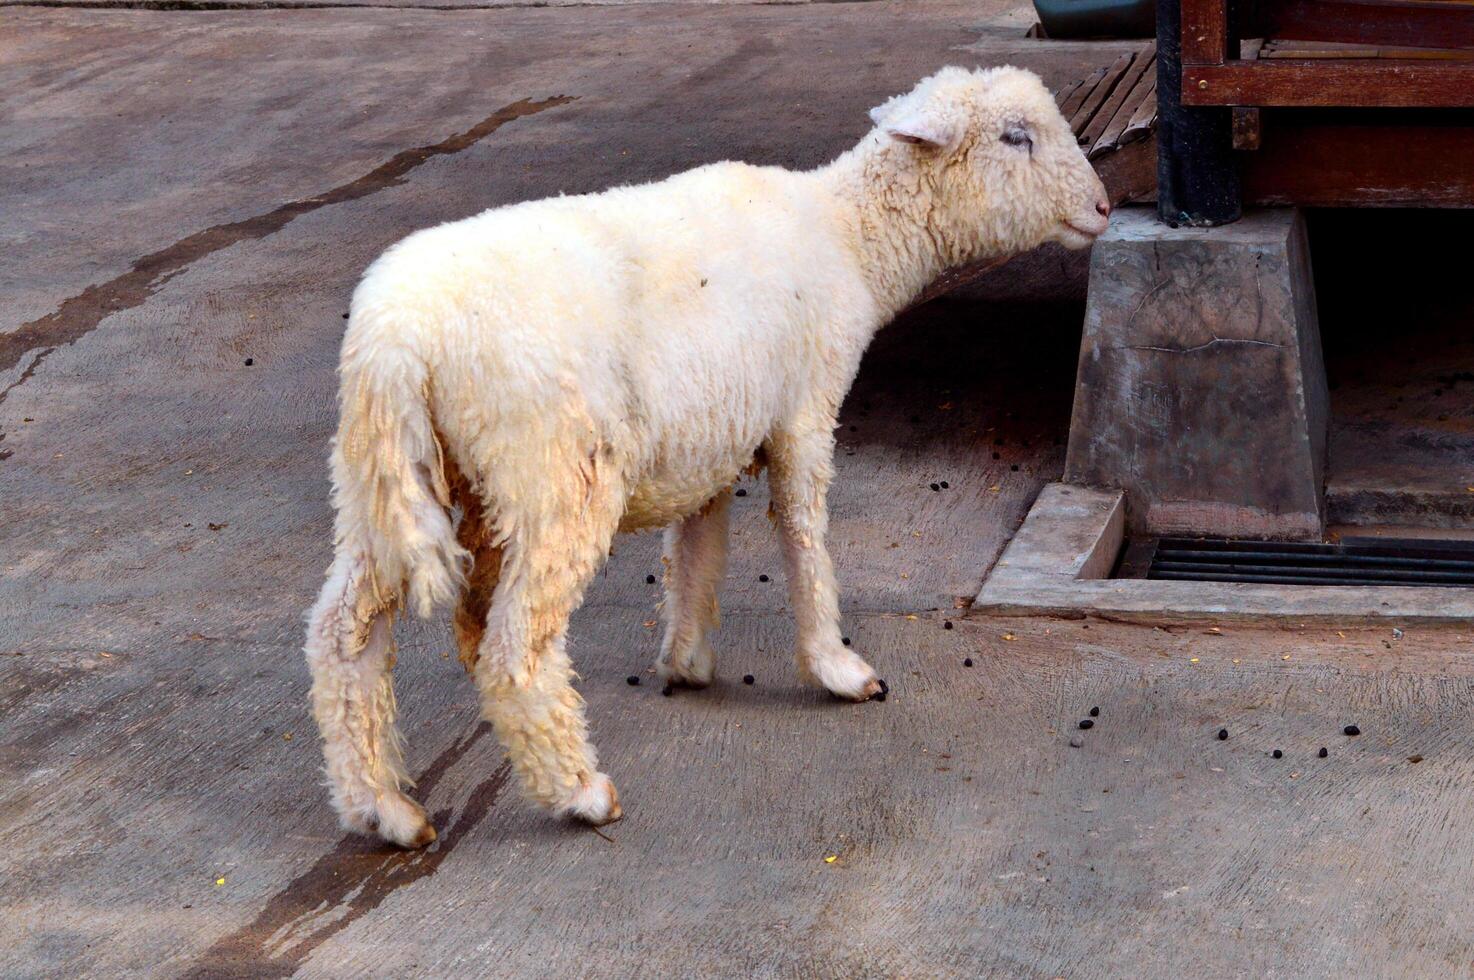 White sheep with a dirty fleece stands on a concrete surface photo